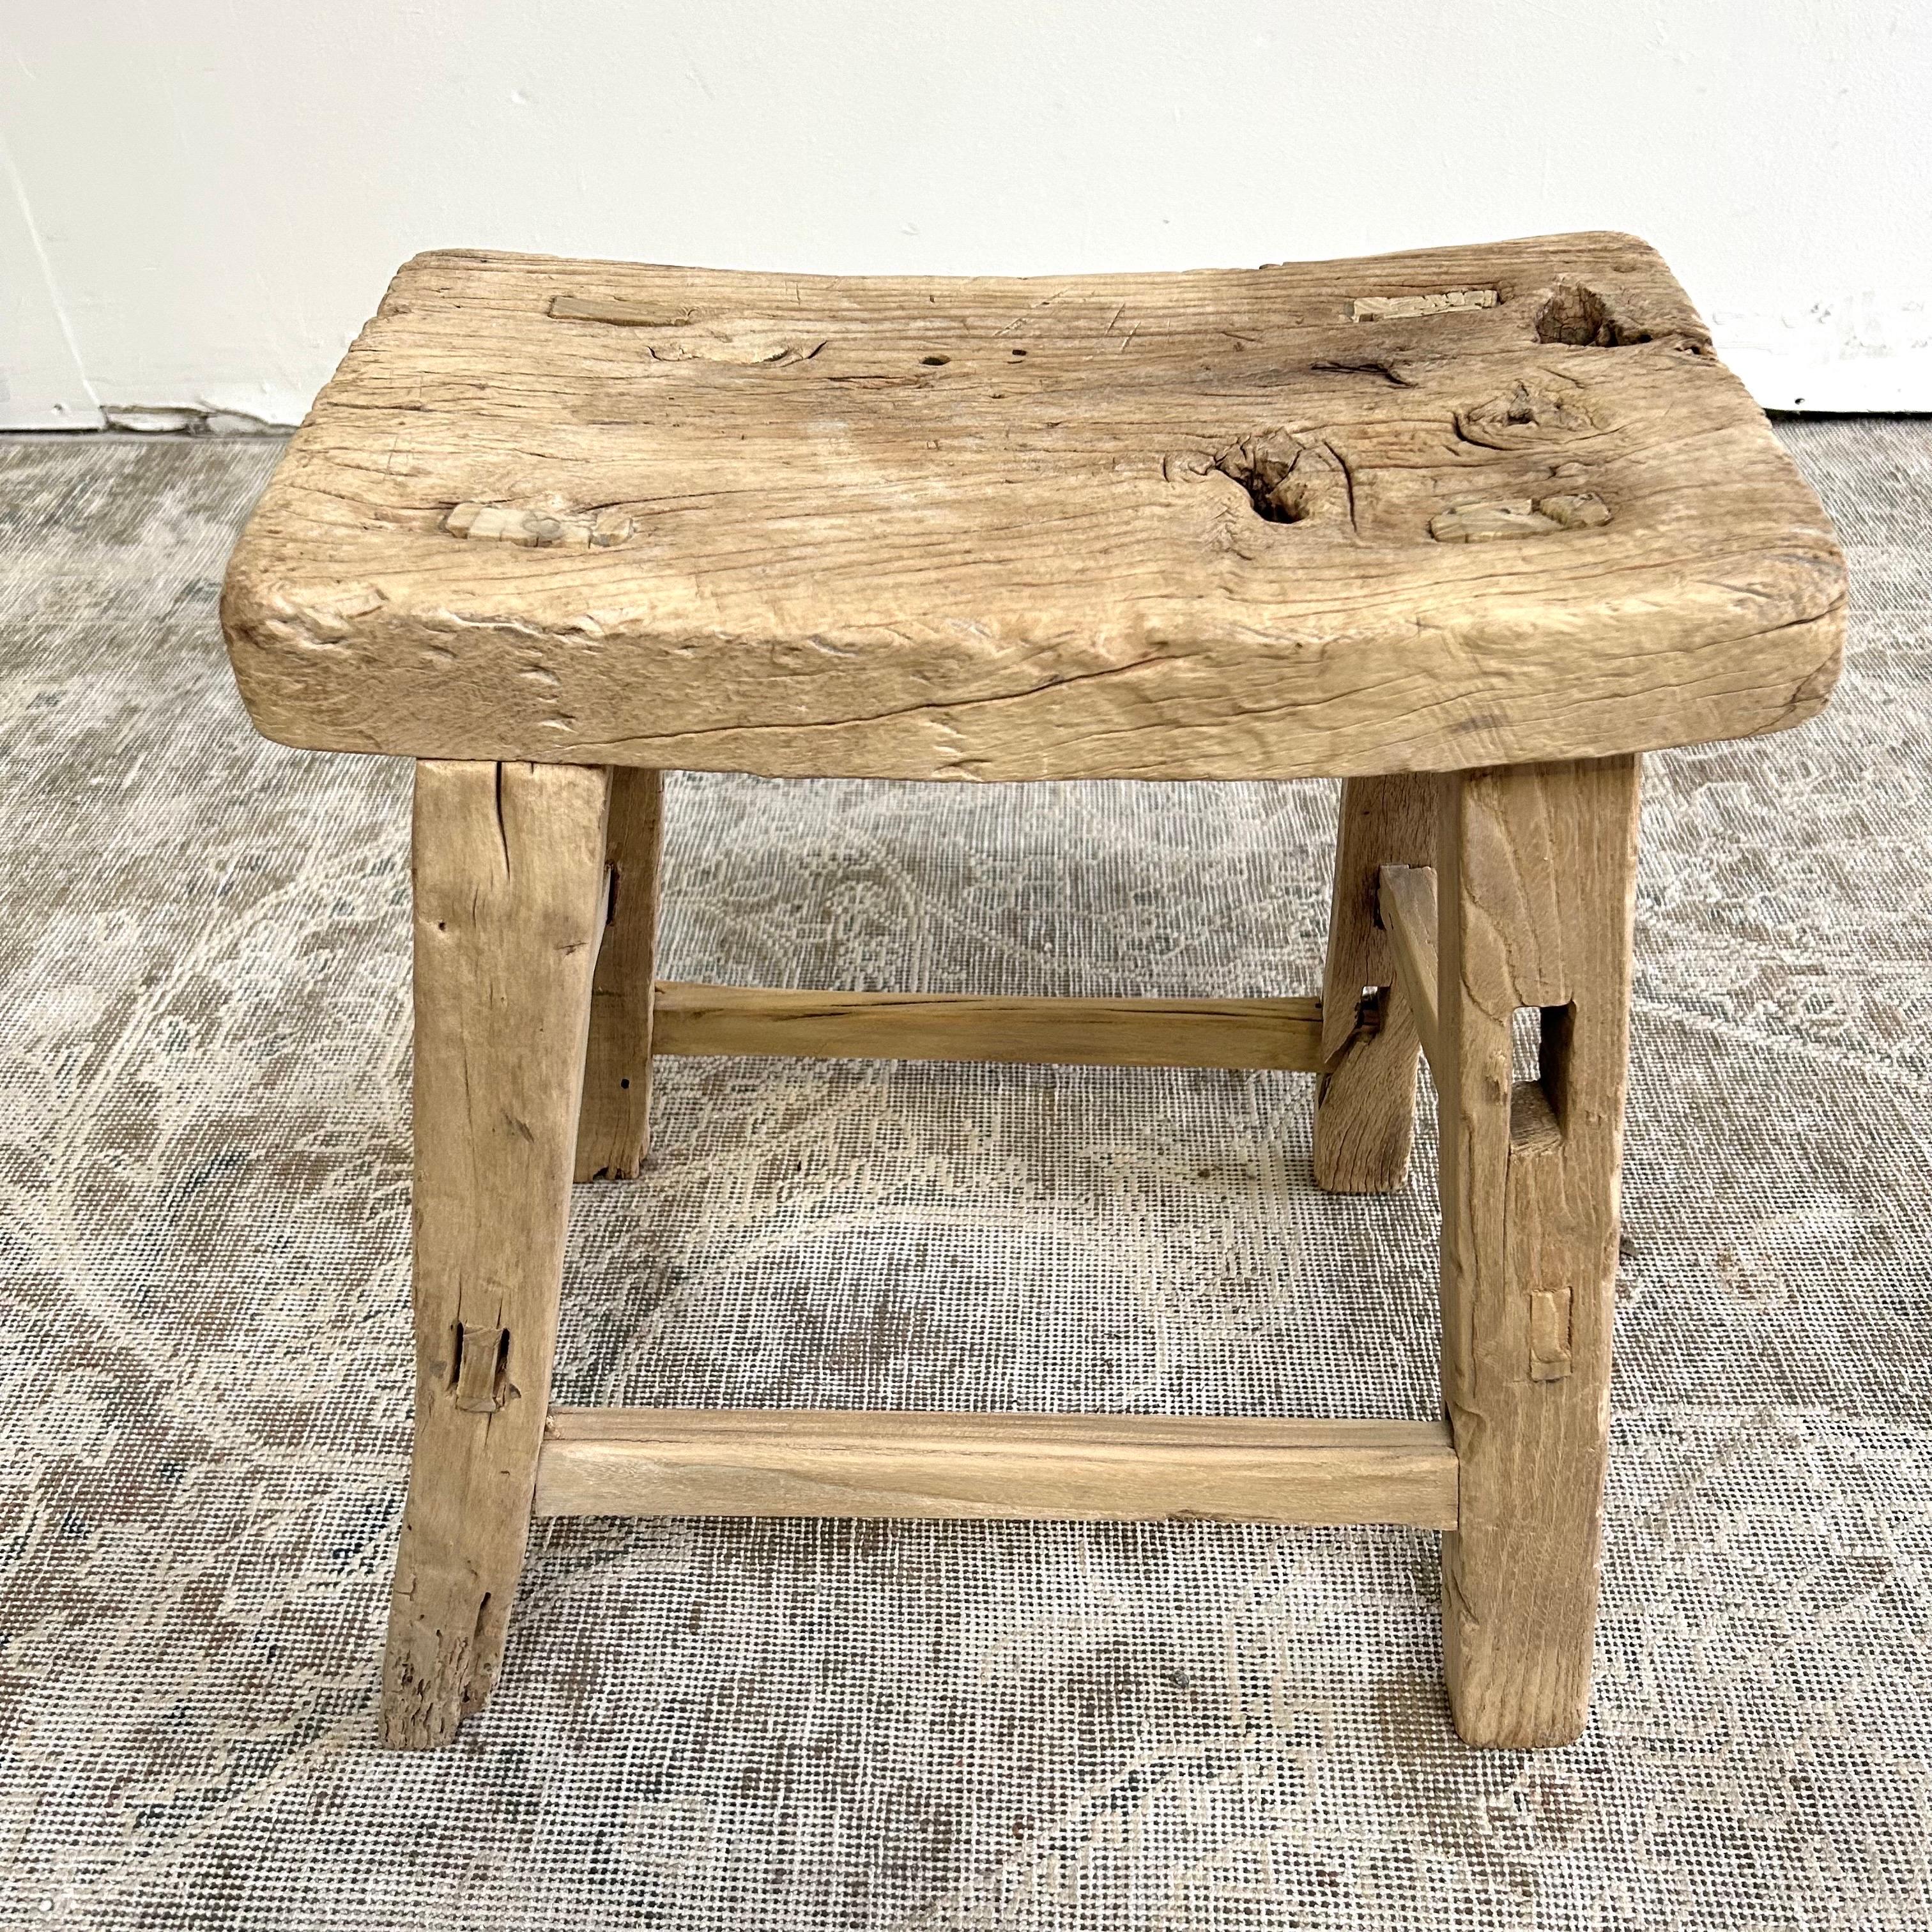 These are the real vintage antique elm wood stools! Beautiful antique patina, with weathering and age, these are solid and sturdy ready for daily use, use as a table, stool, drink table, they are great for any space. Each piece is truly unique and